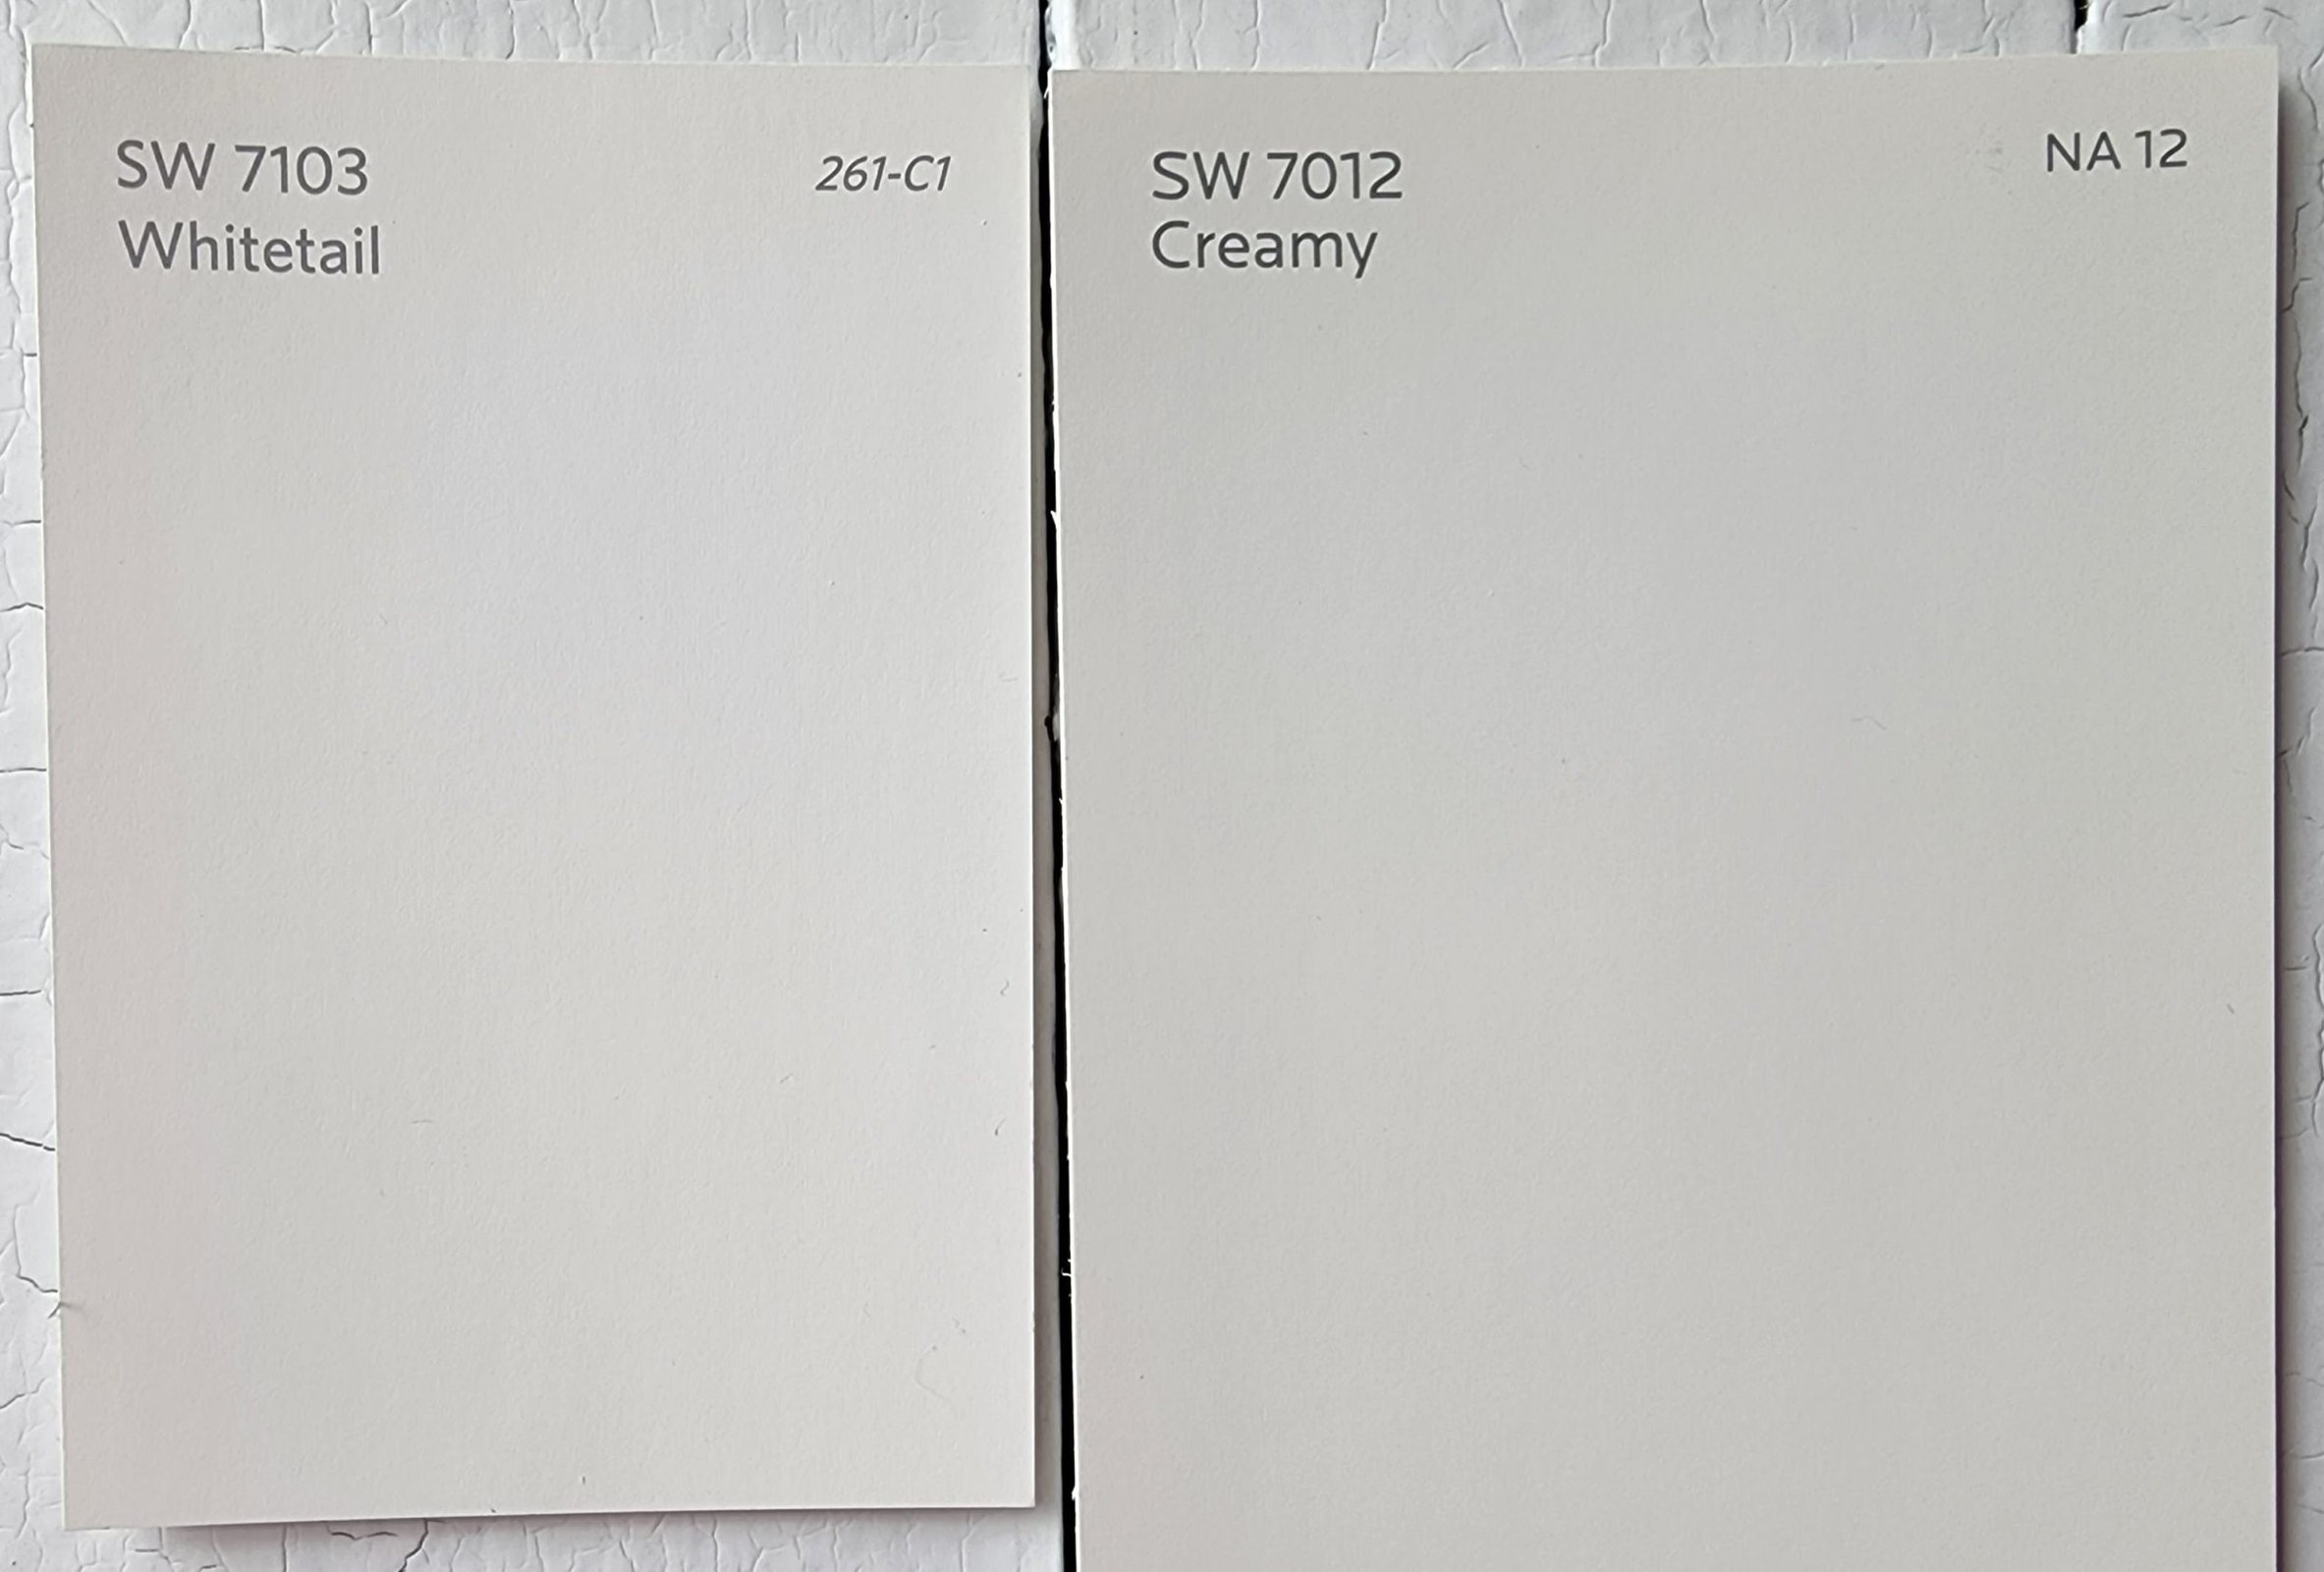  Whitetail vs Creamy by Sherwin Williams scaled